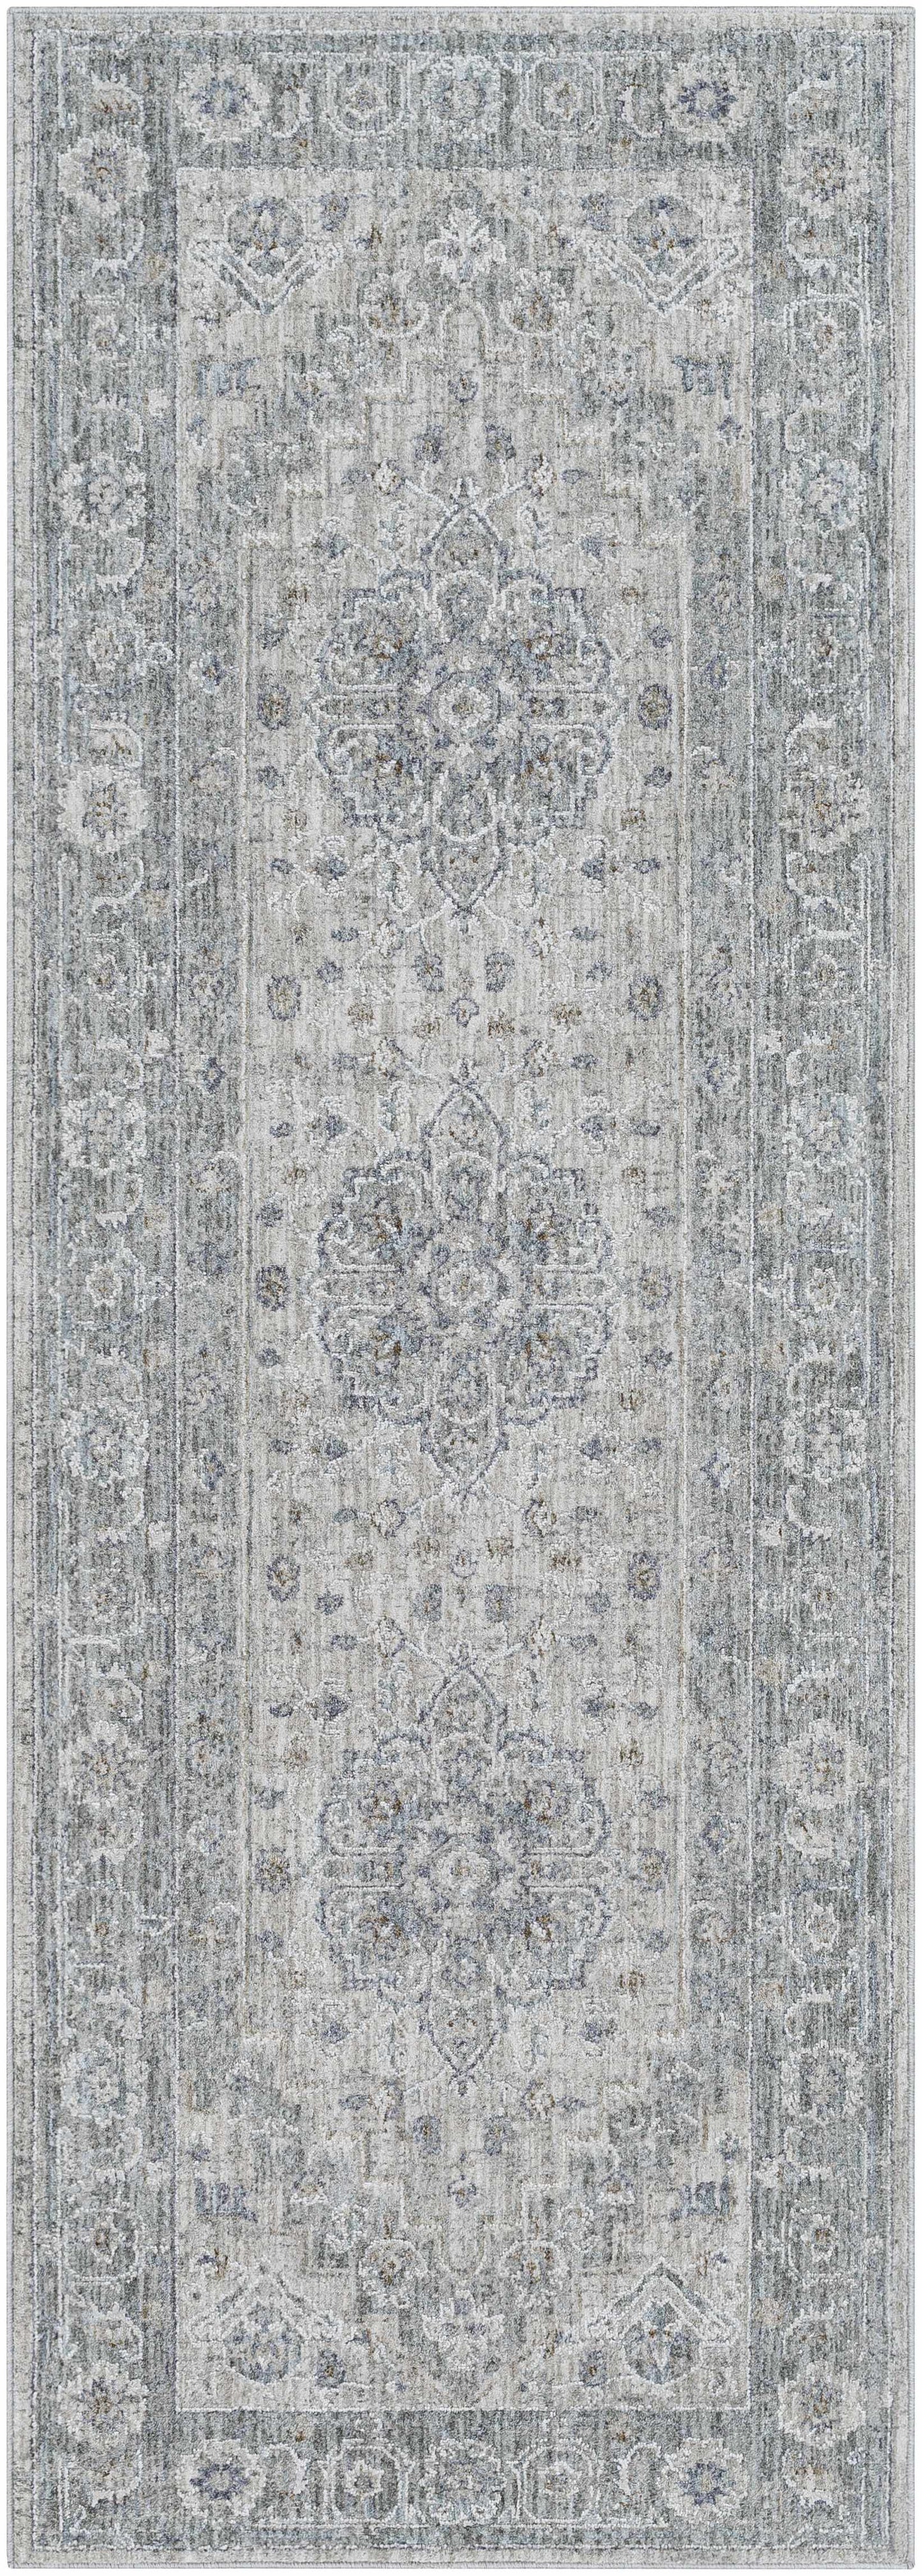 Boutique Rugs Rugs 2'7" x 10' Runner Semaphore Area Rug